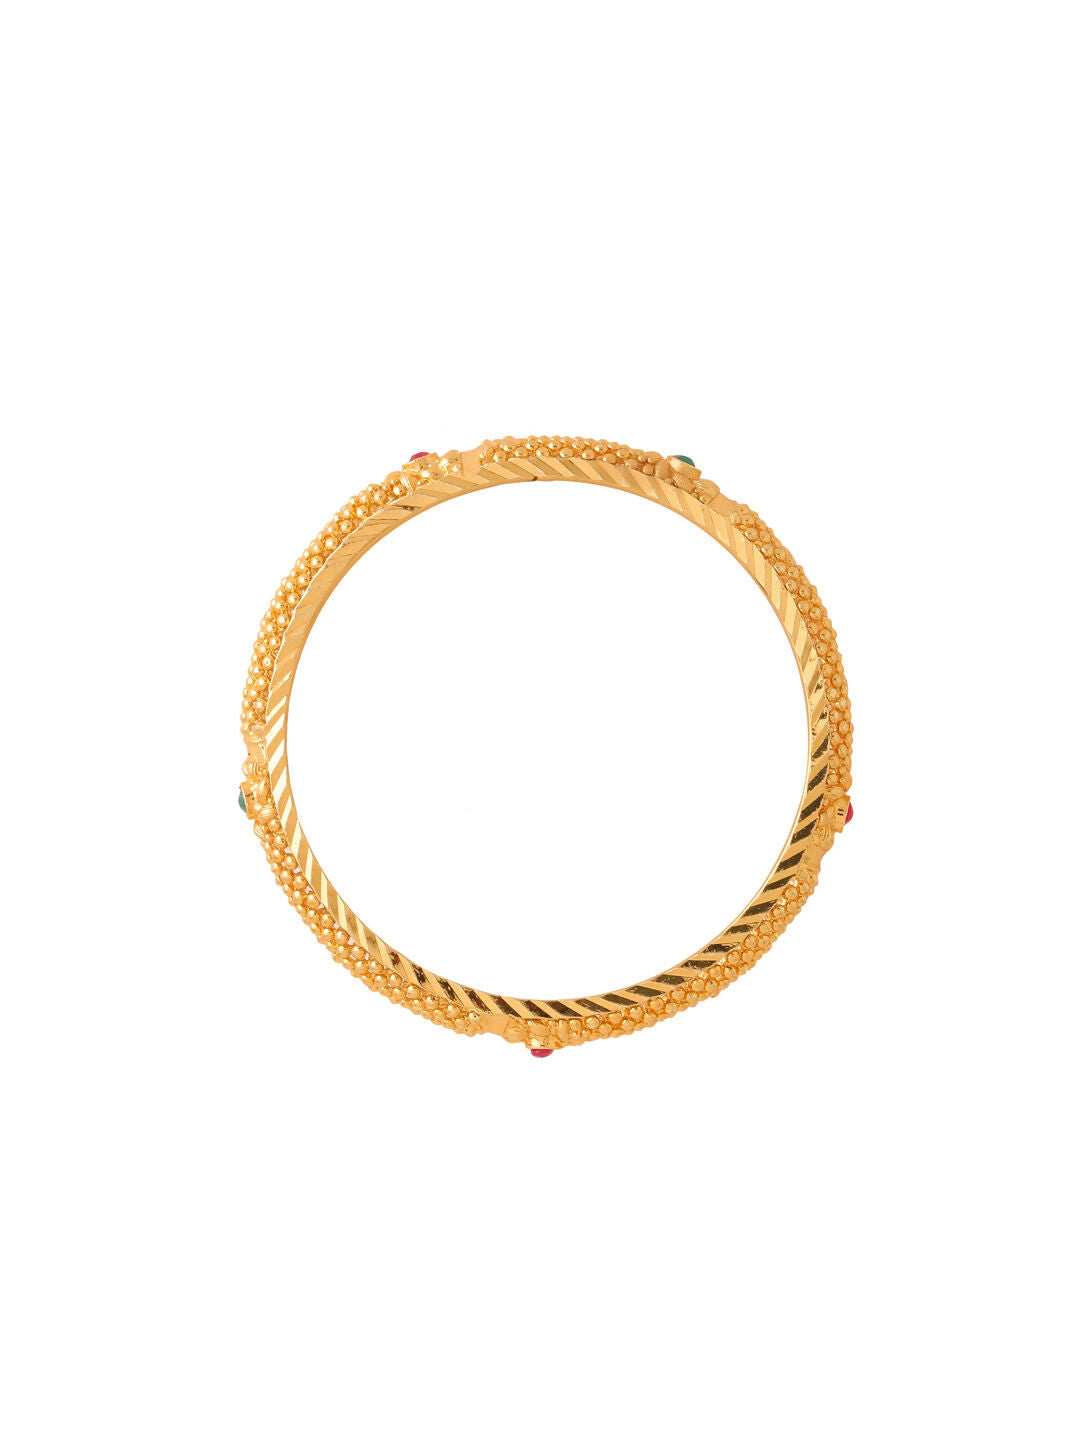 NVR Women's Set of 2 Gold-Plated Traditional Bangles - Distacart